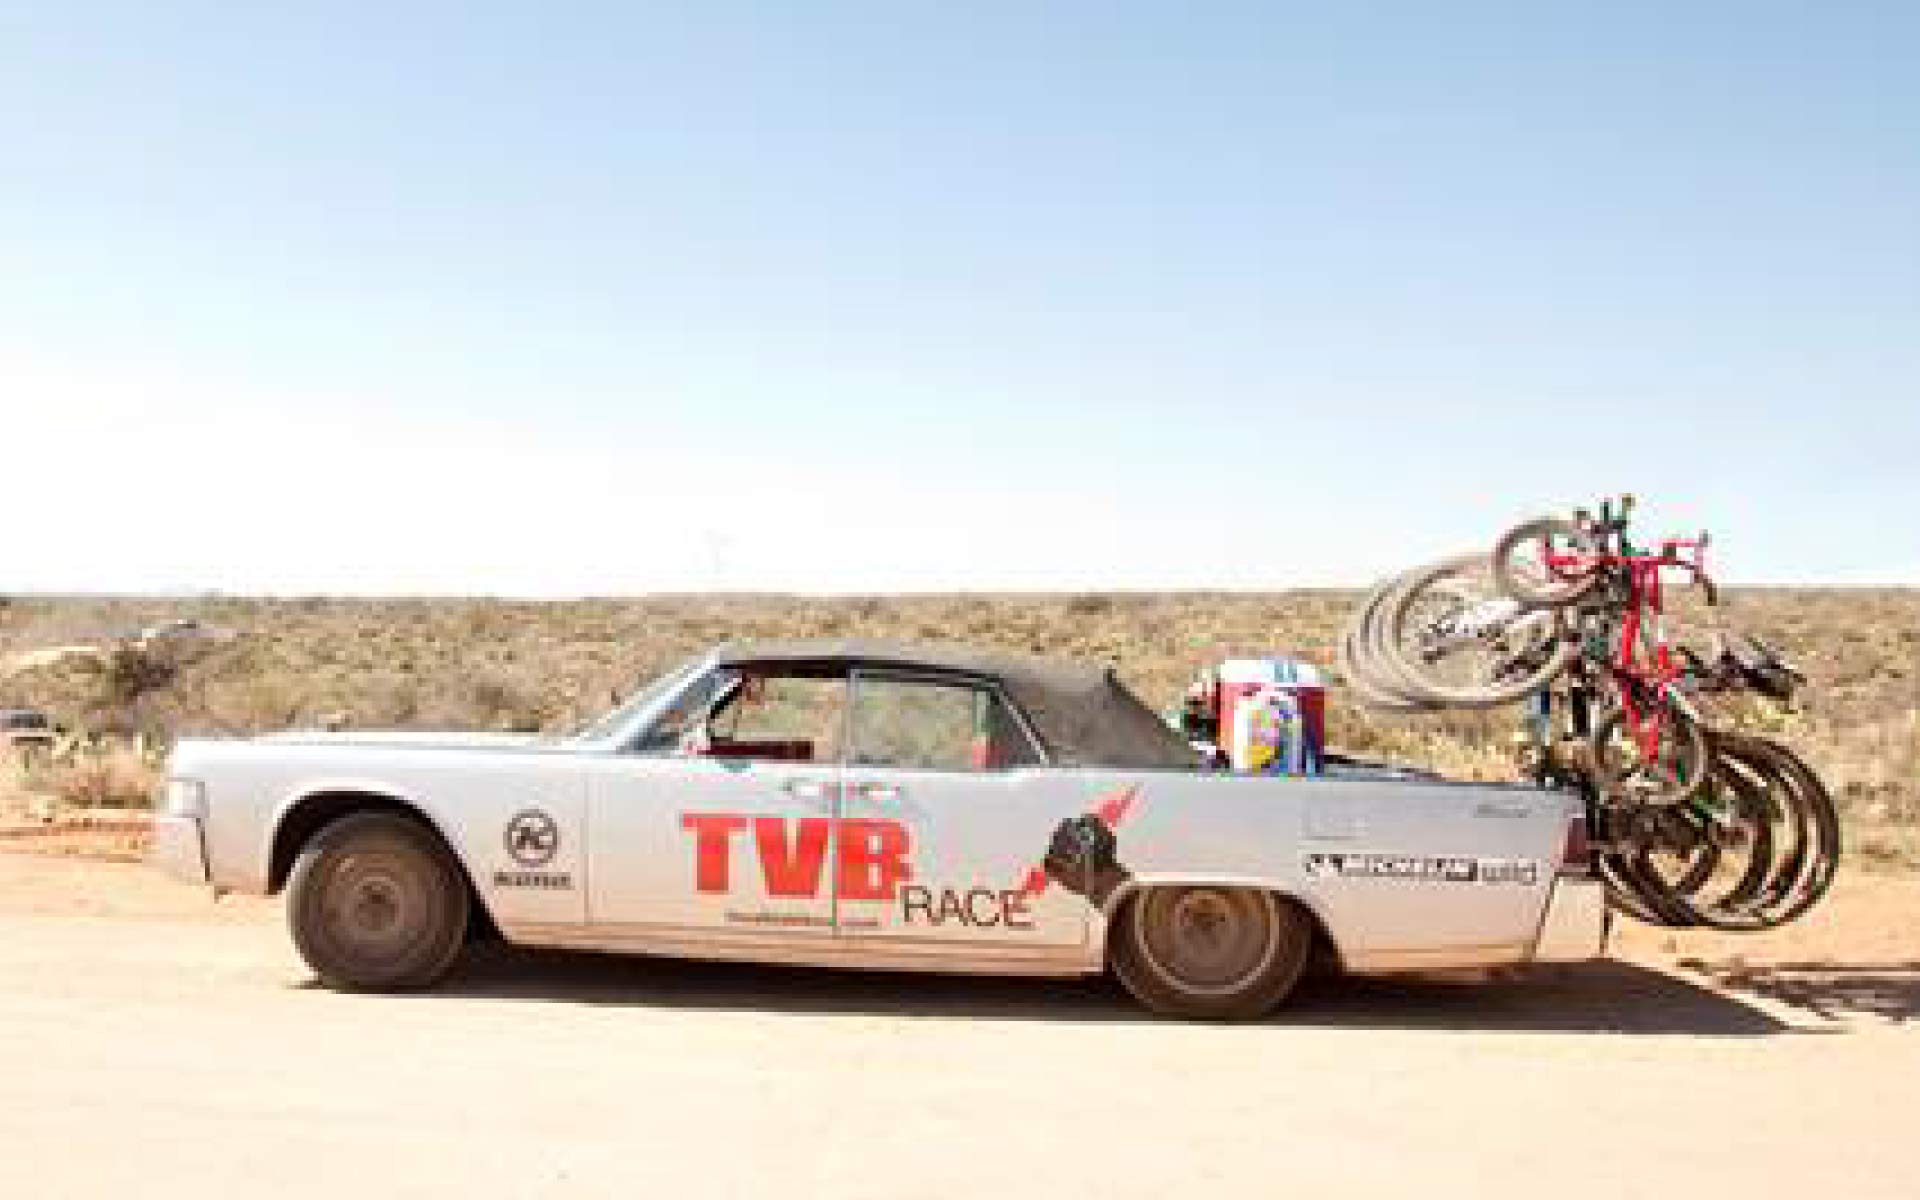 Vintage Car with "TVB Race" on the side drives down a dirt road with bikes mounted on the back